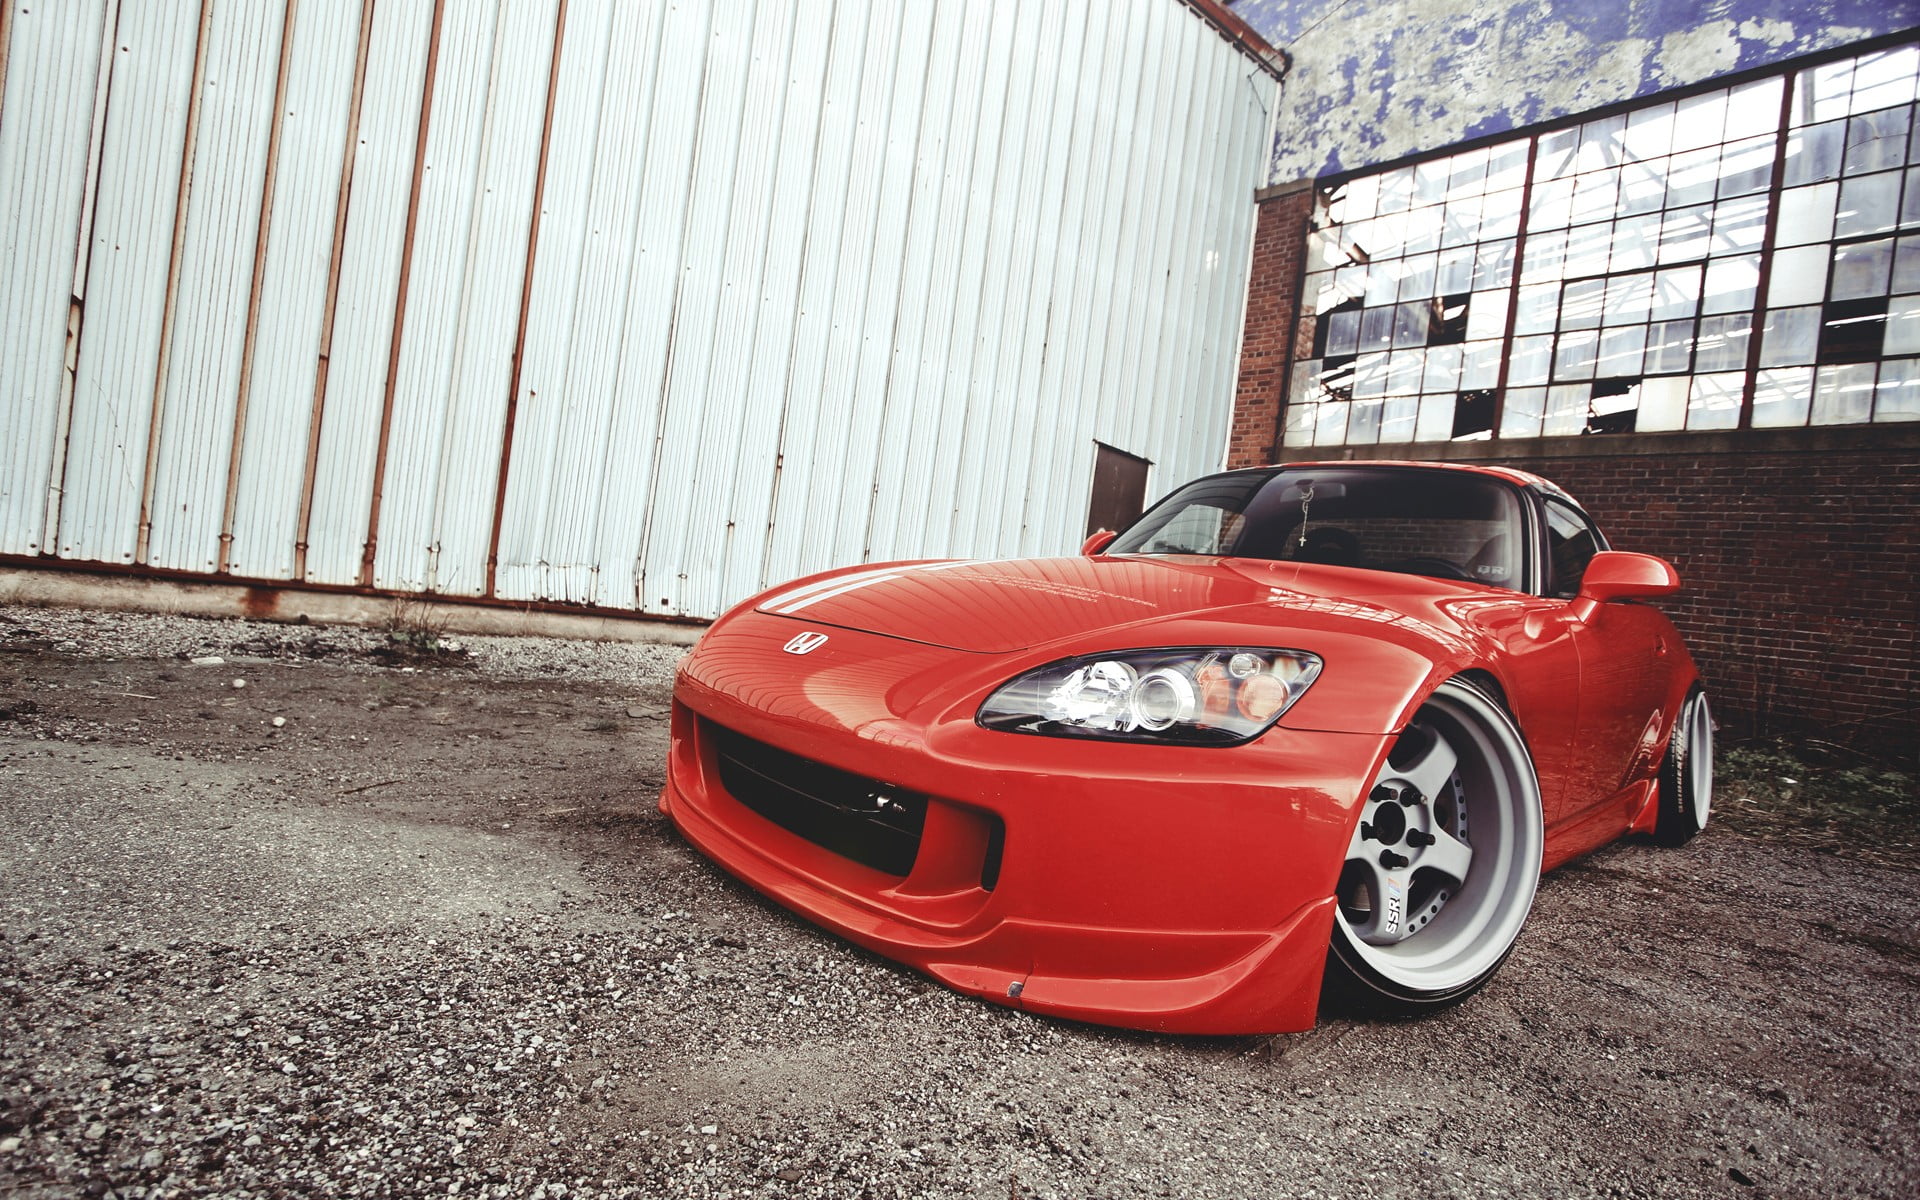 Honda, s2000, car, red, mode of transportation, architecture